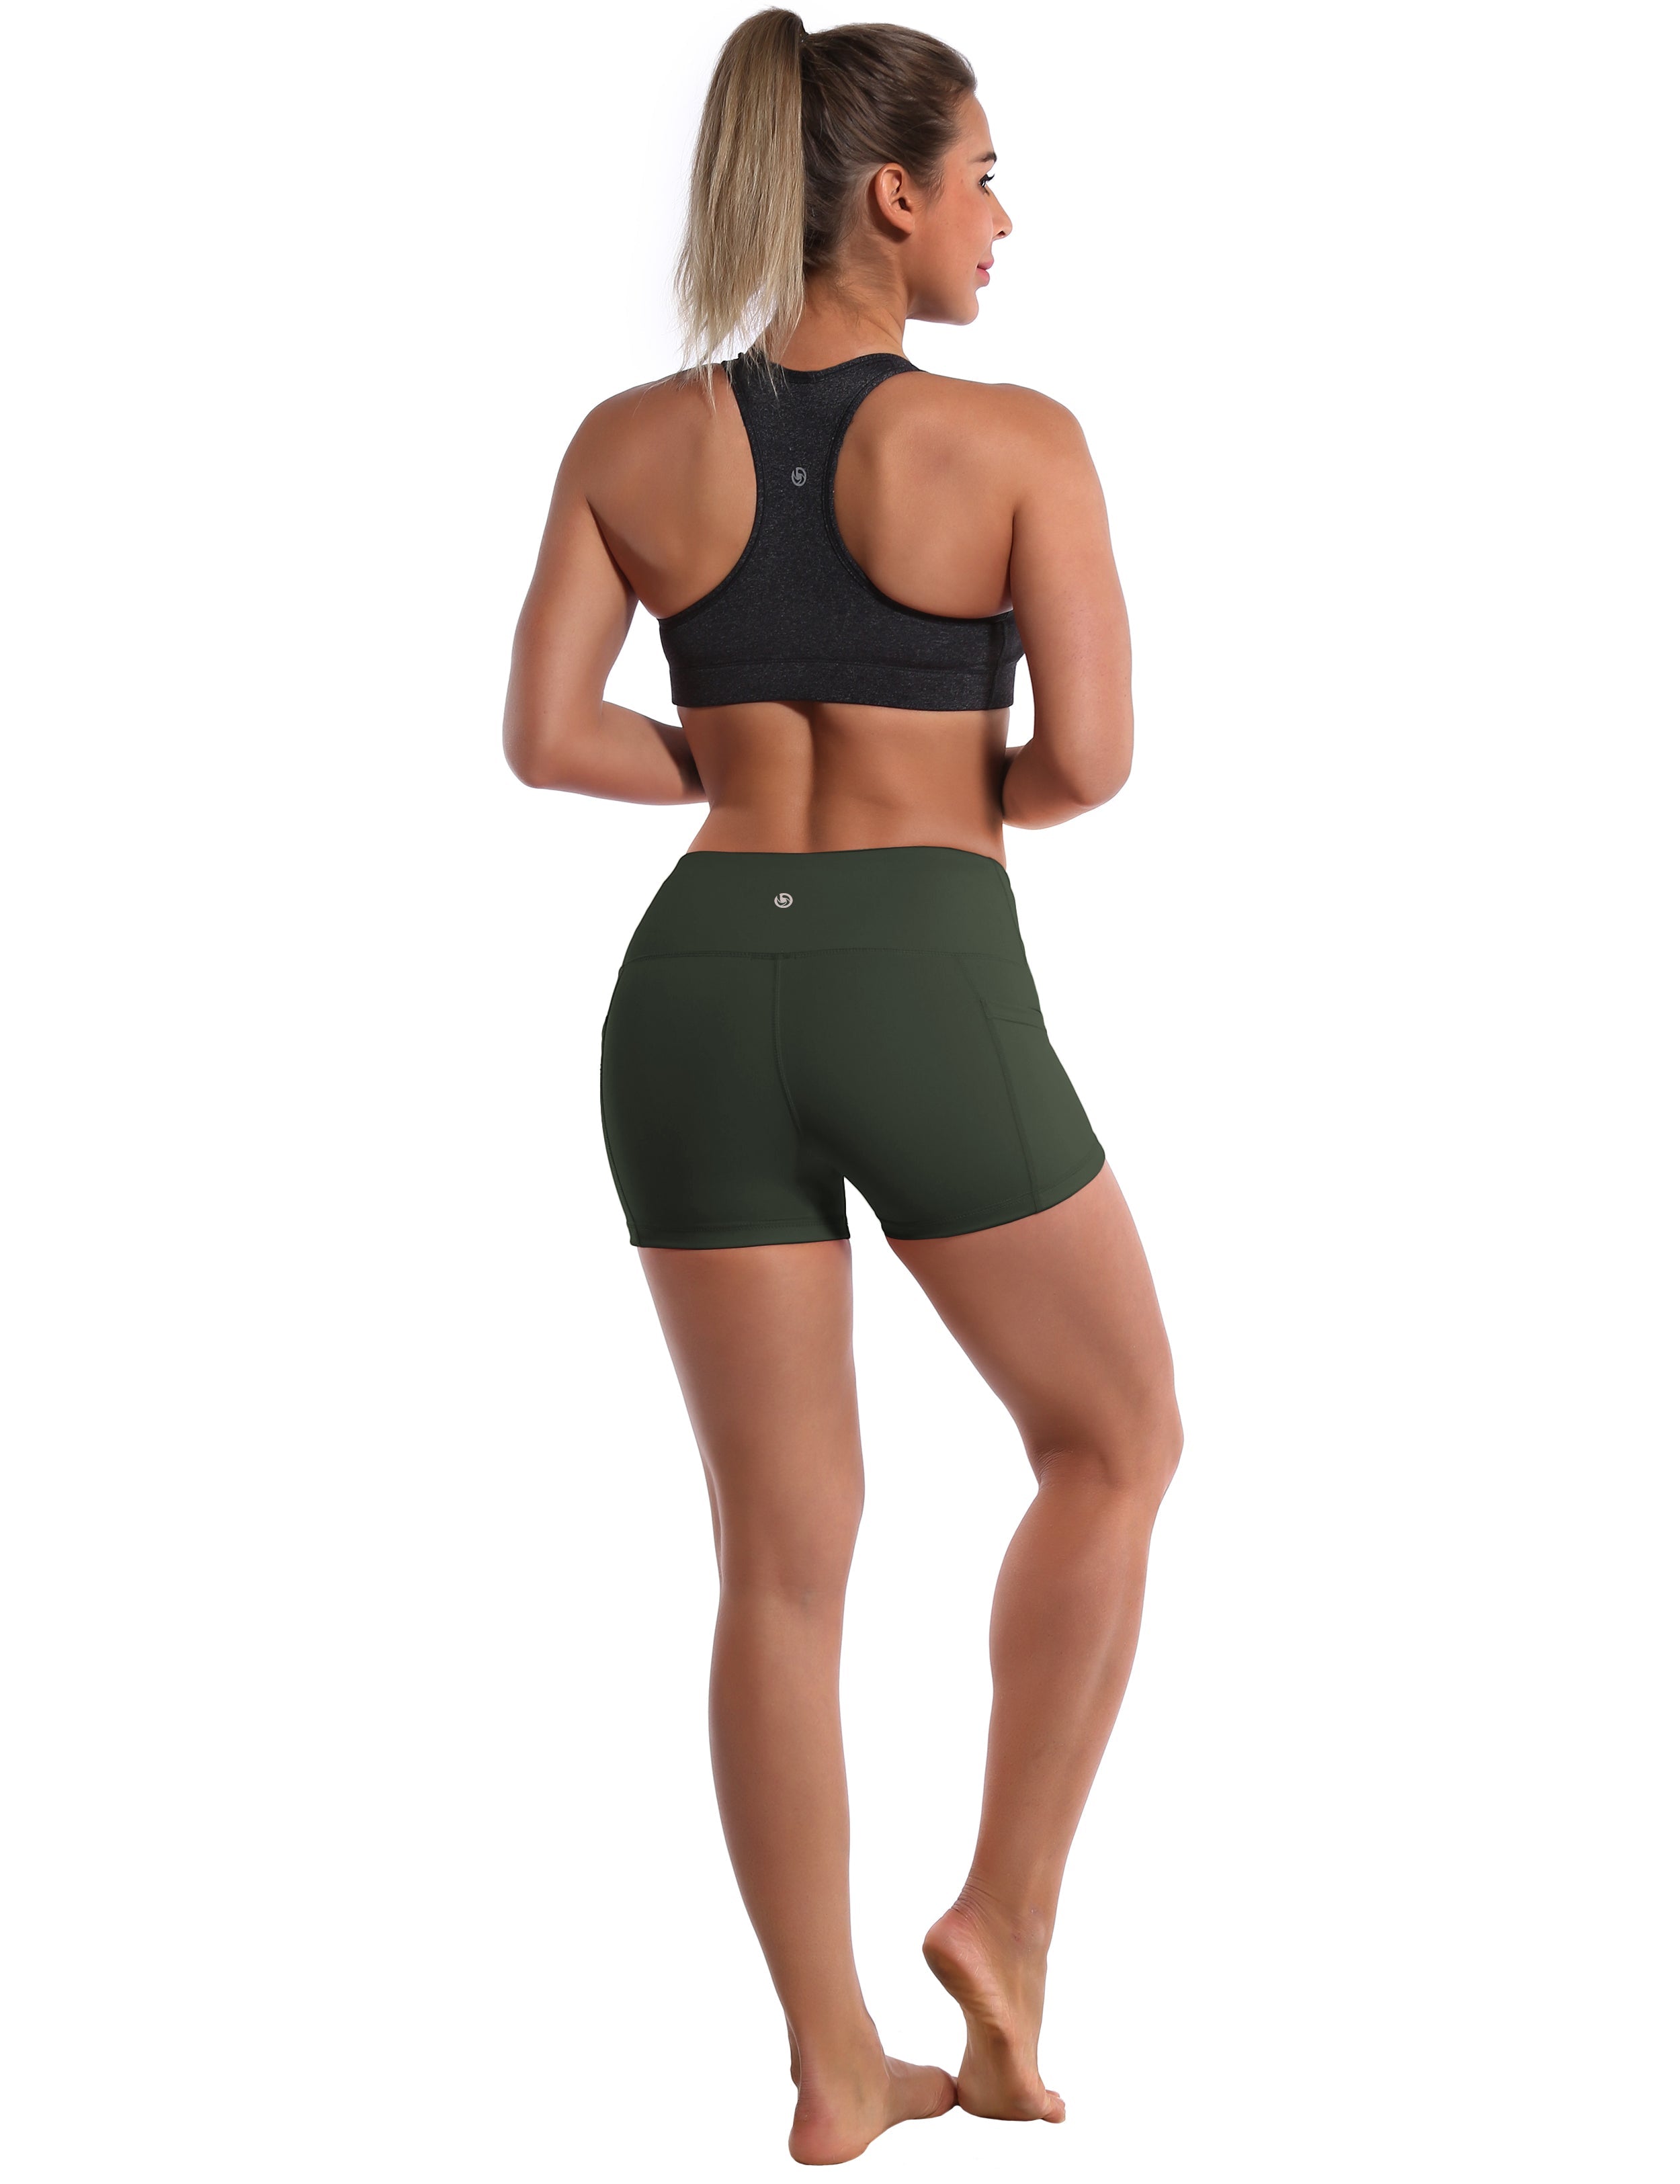 2.5" Side Pockets Jogging Shorts olivegray Sleek, soft, smooth and totally comfortable: our newest sexy style is here. Softest-ever fabric High elasticity High density 4-way stretch Fabric doesn't attract lint easily No see-through Moisture-wicking Machine wash 78% Polyester, 22% Spandex